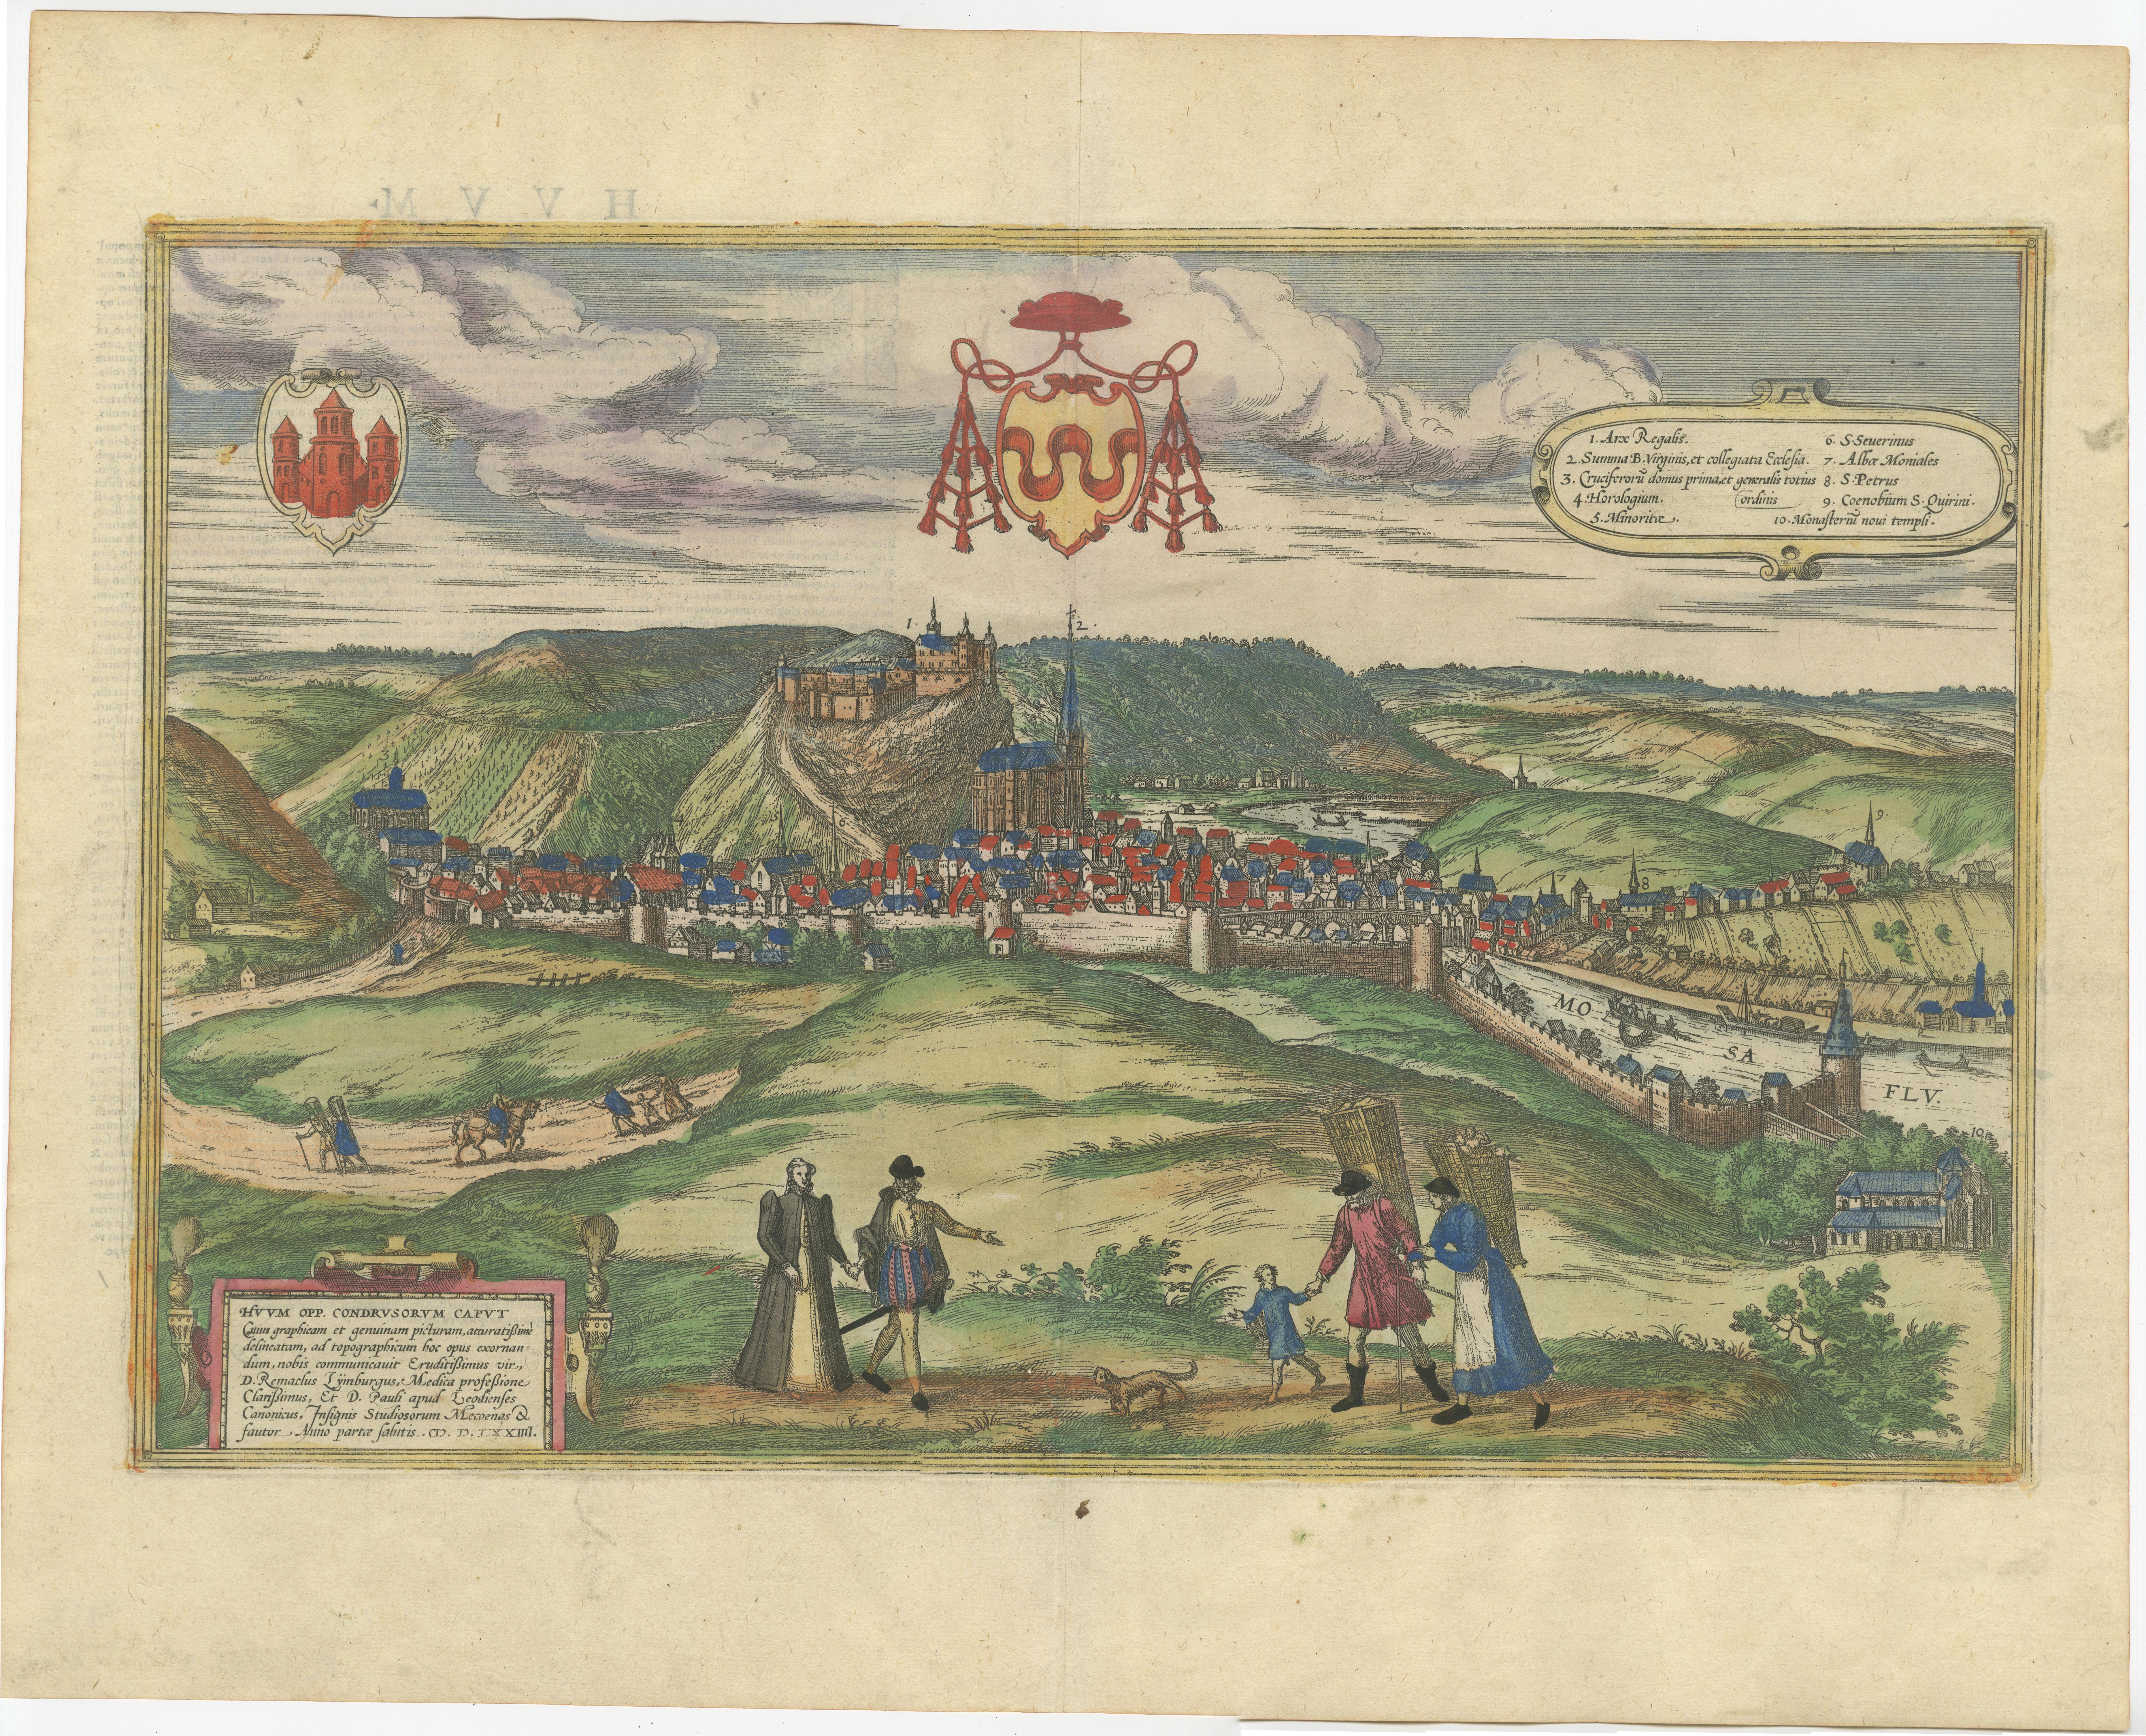 Antique print titled 'Huum Opp. Condrusorum Caput (..)'. Attractive bird’s eye view of Huy in present day Belgium. The view shows the city from the northeast. Huy, a municipality of Belgium, lies on the River Meuse in the province of Liege. The